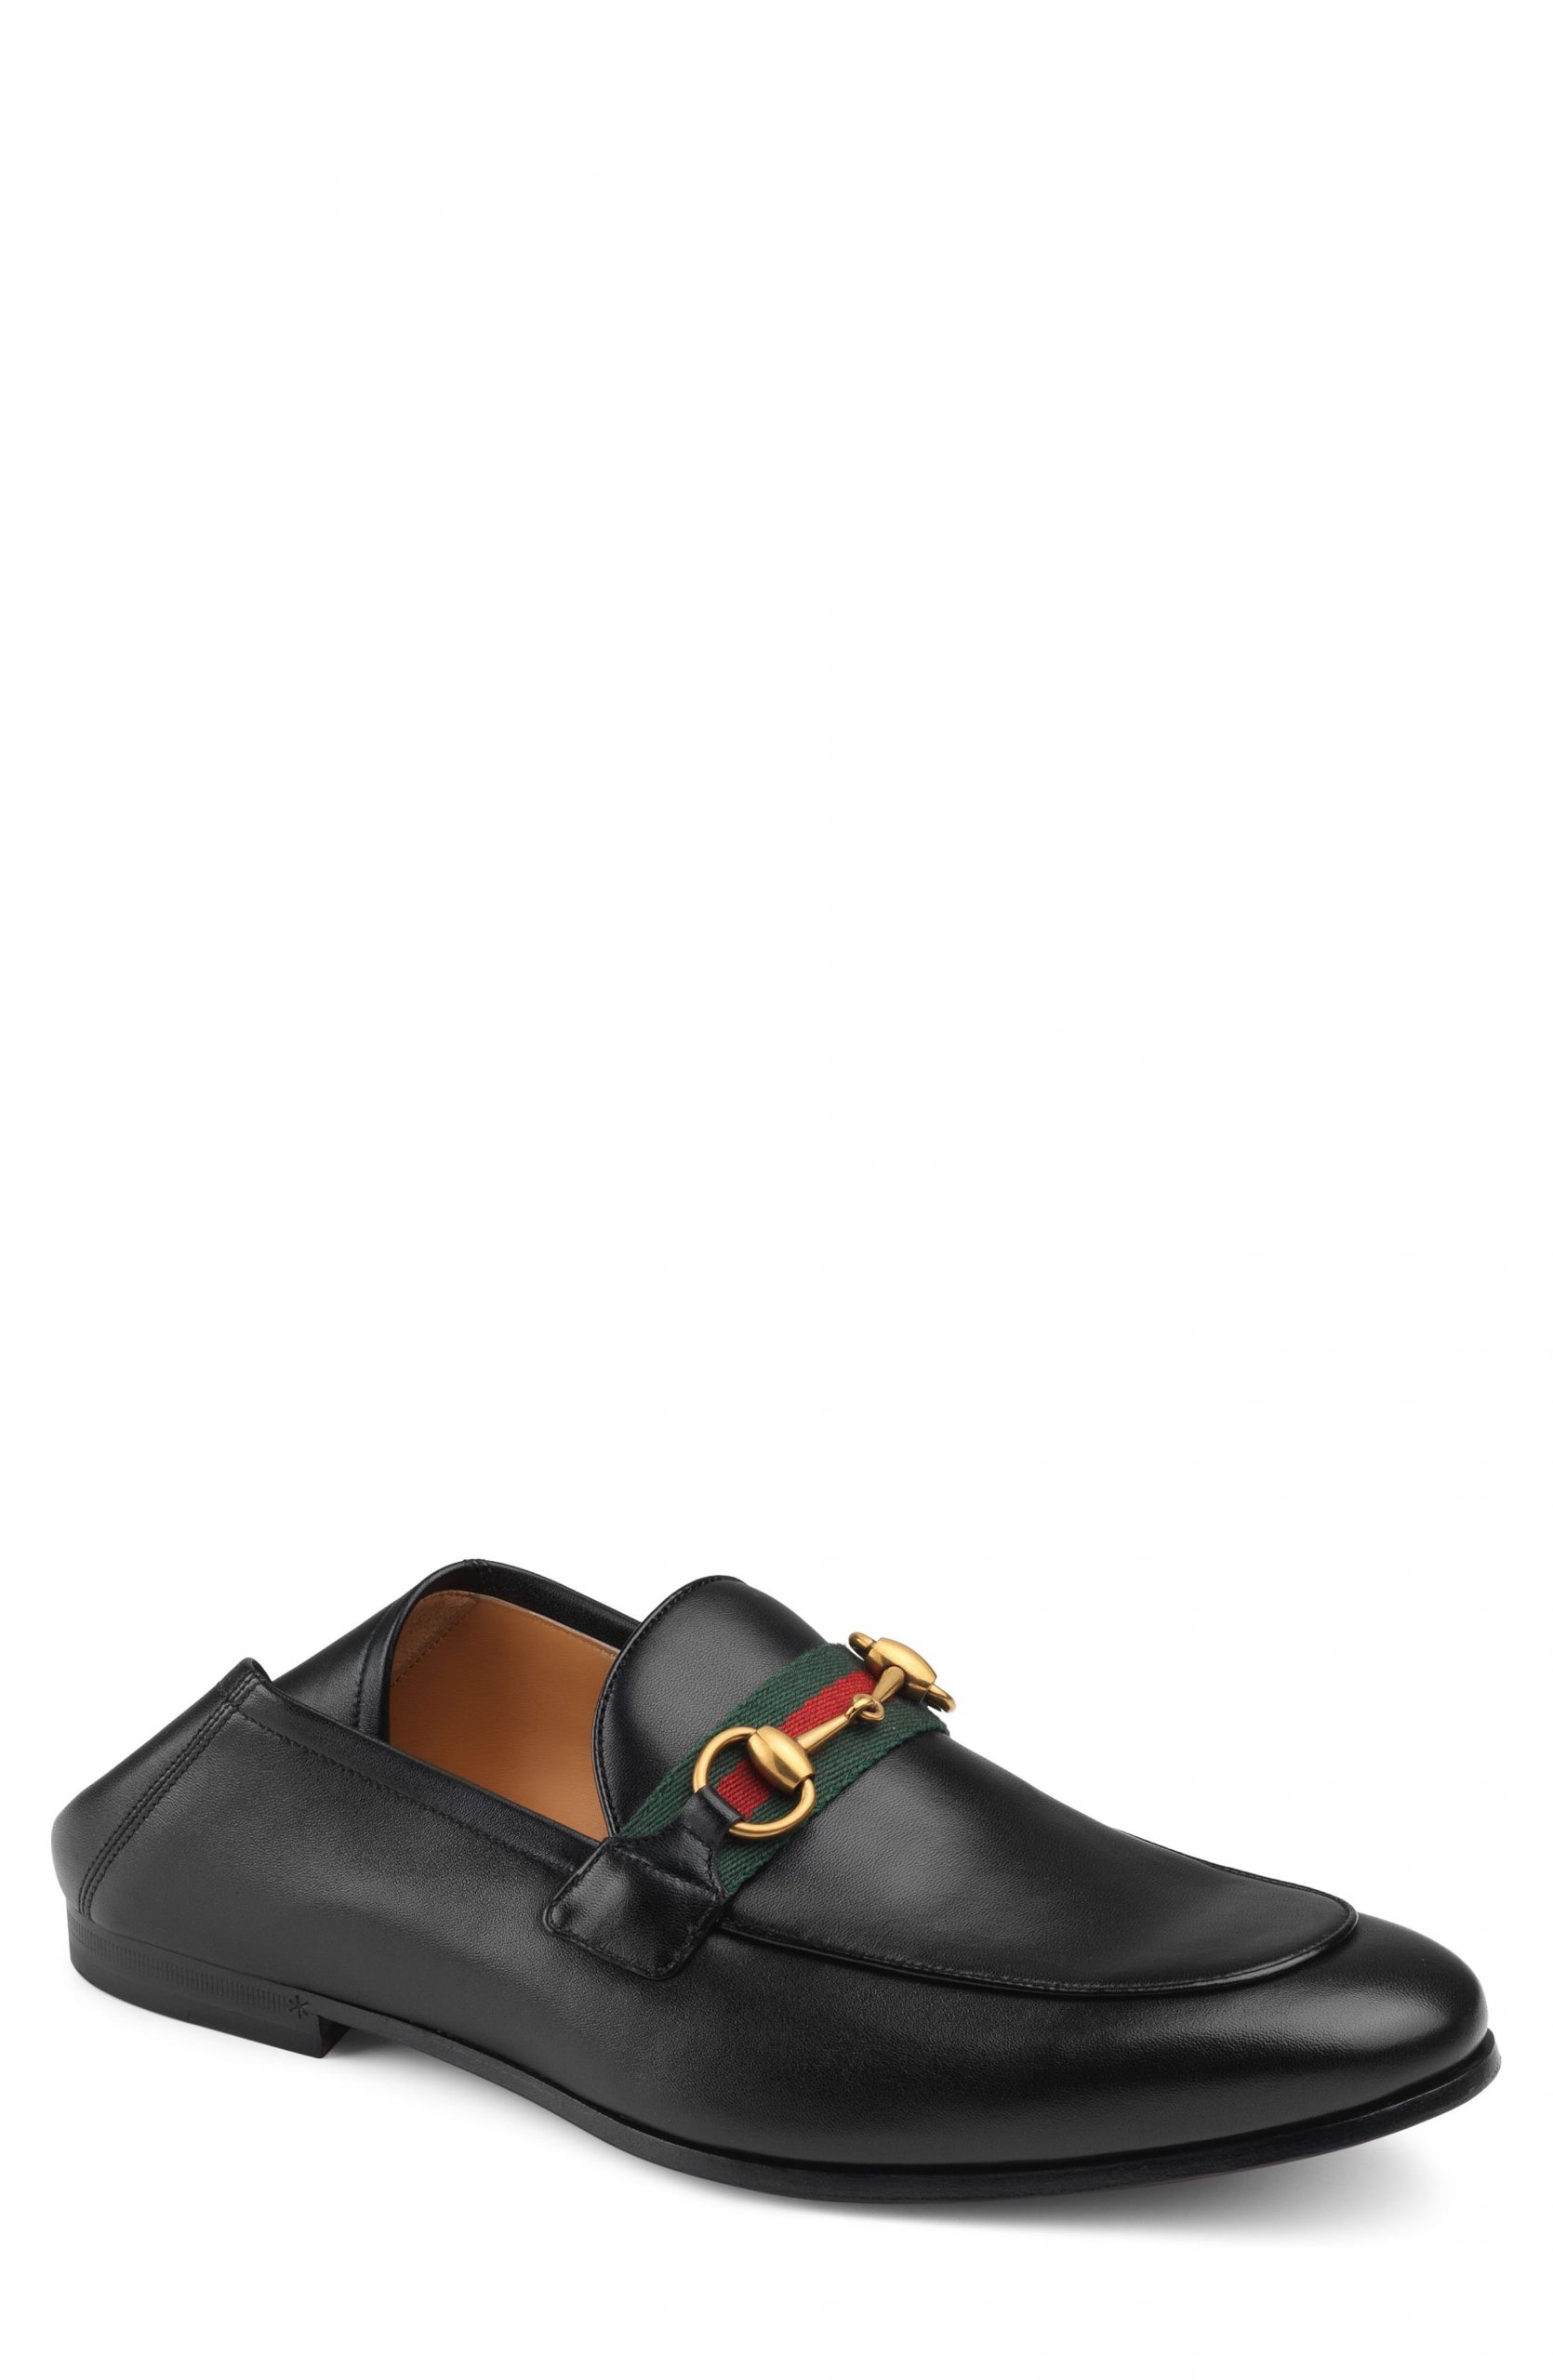 gucci convertible loafer